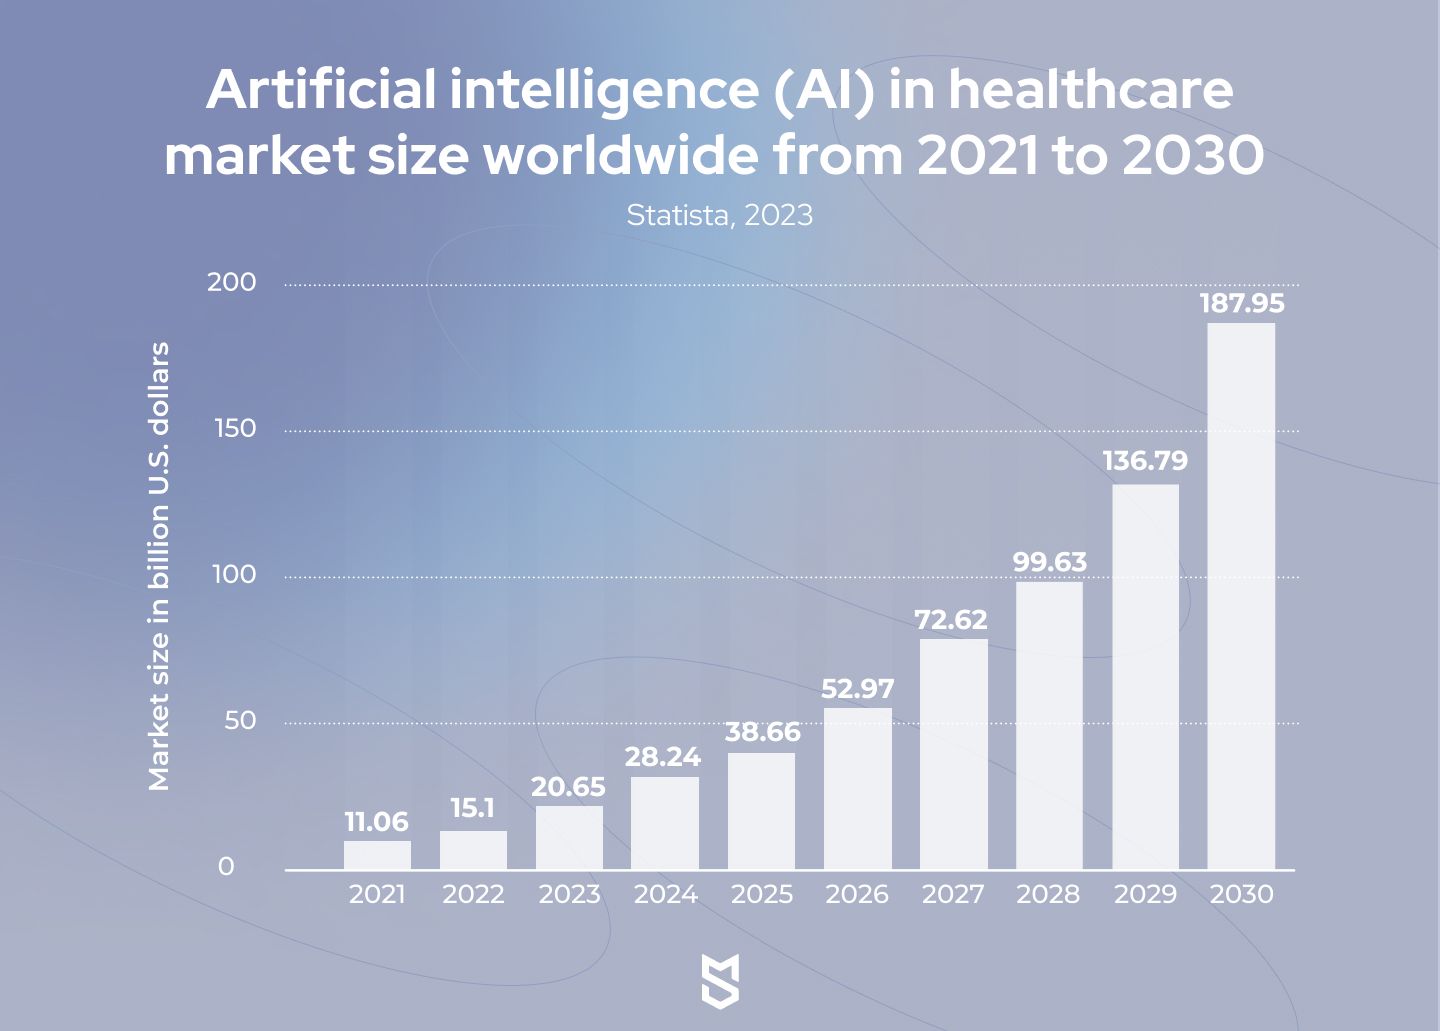 AI in healthcare market size worldwide from 2021 to 2030